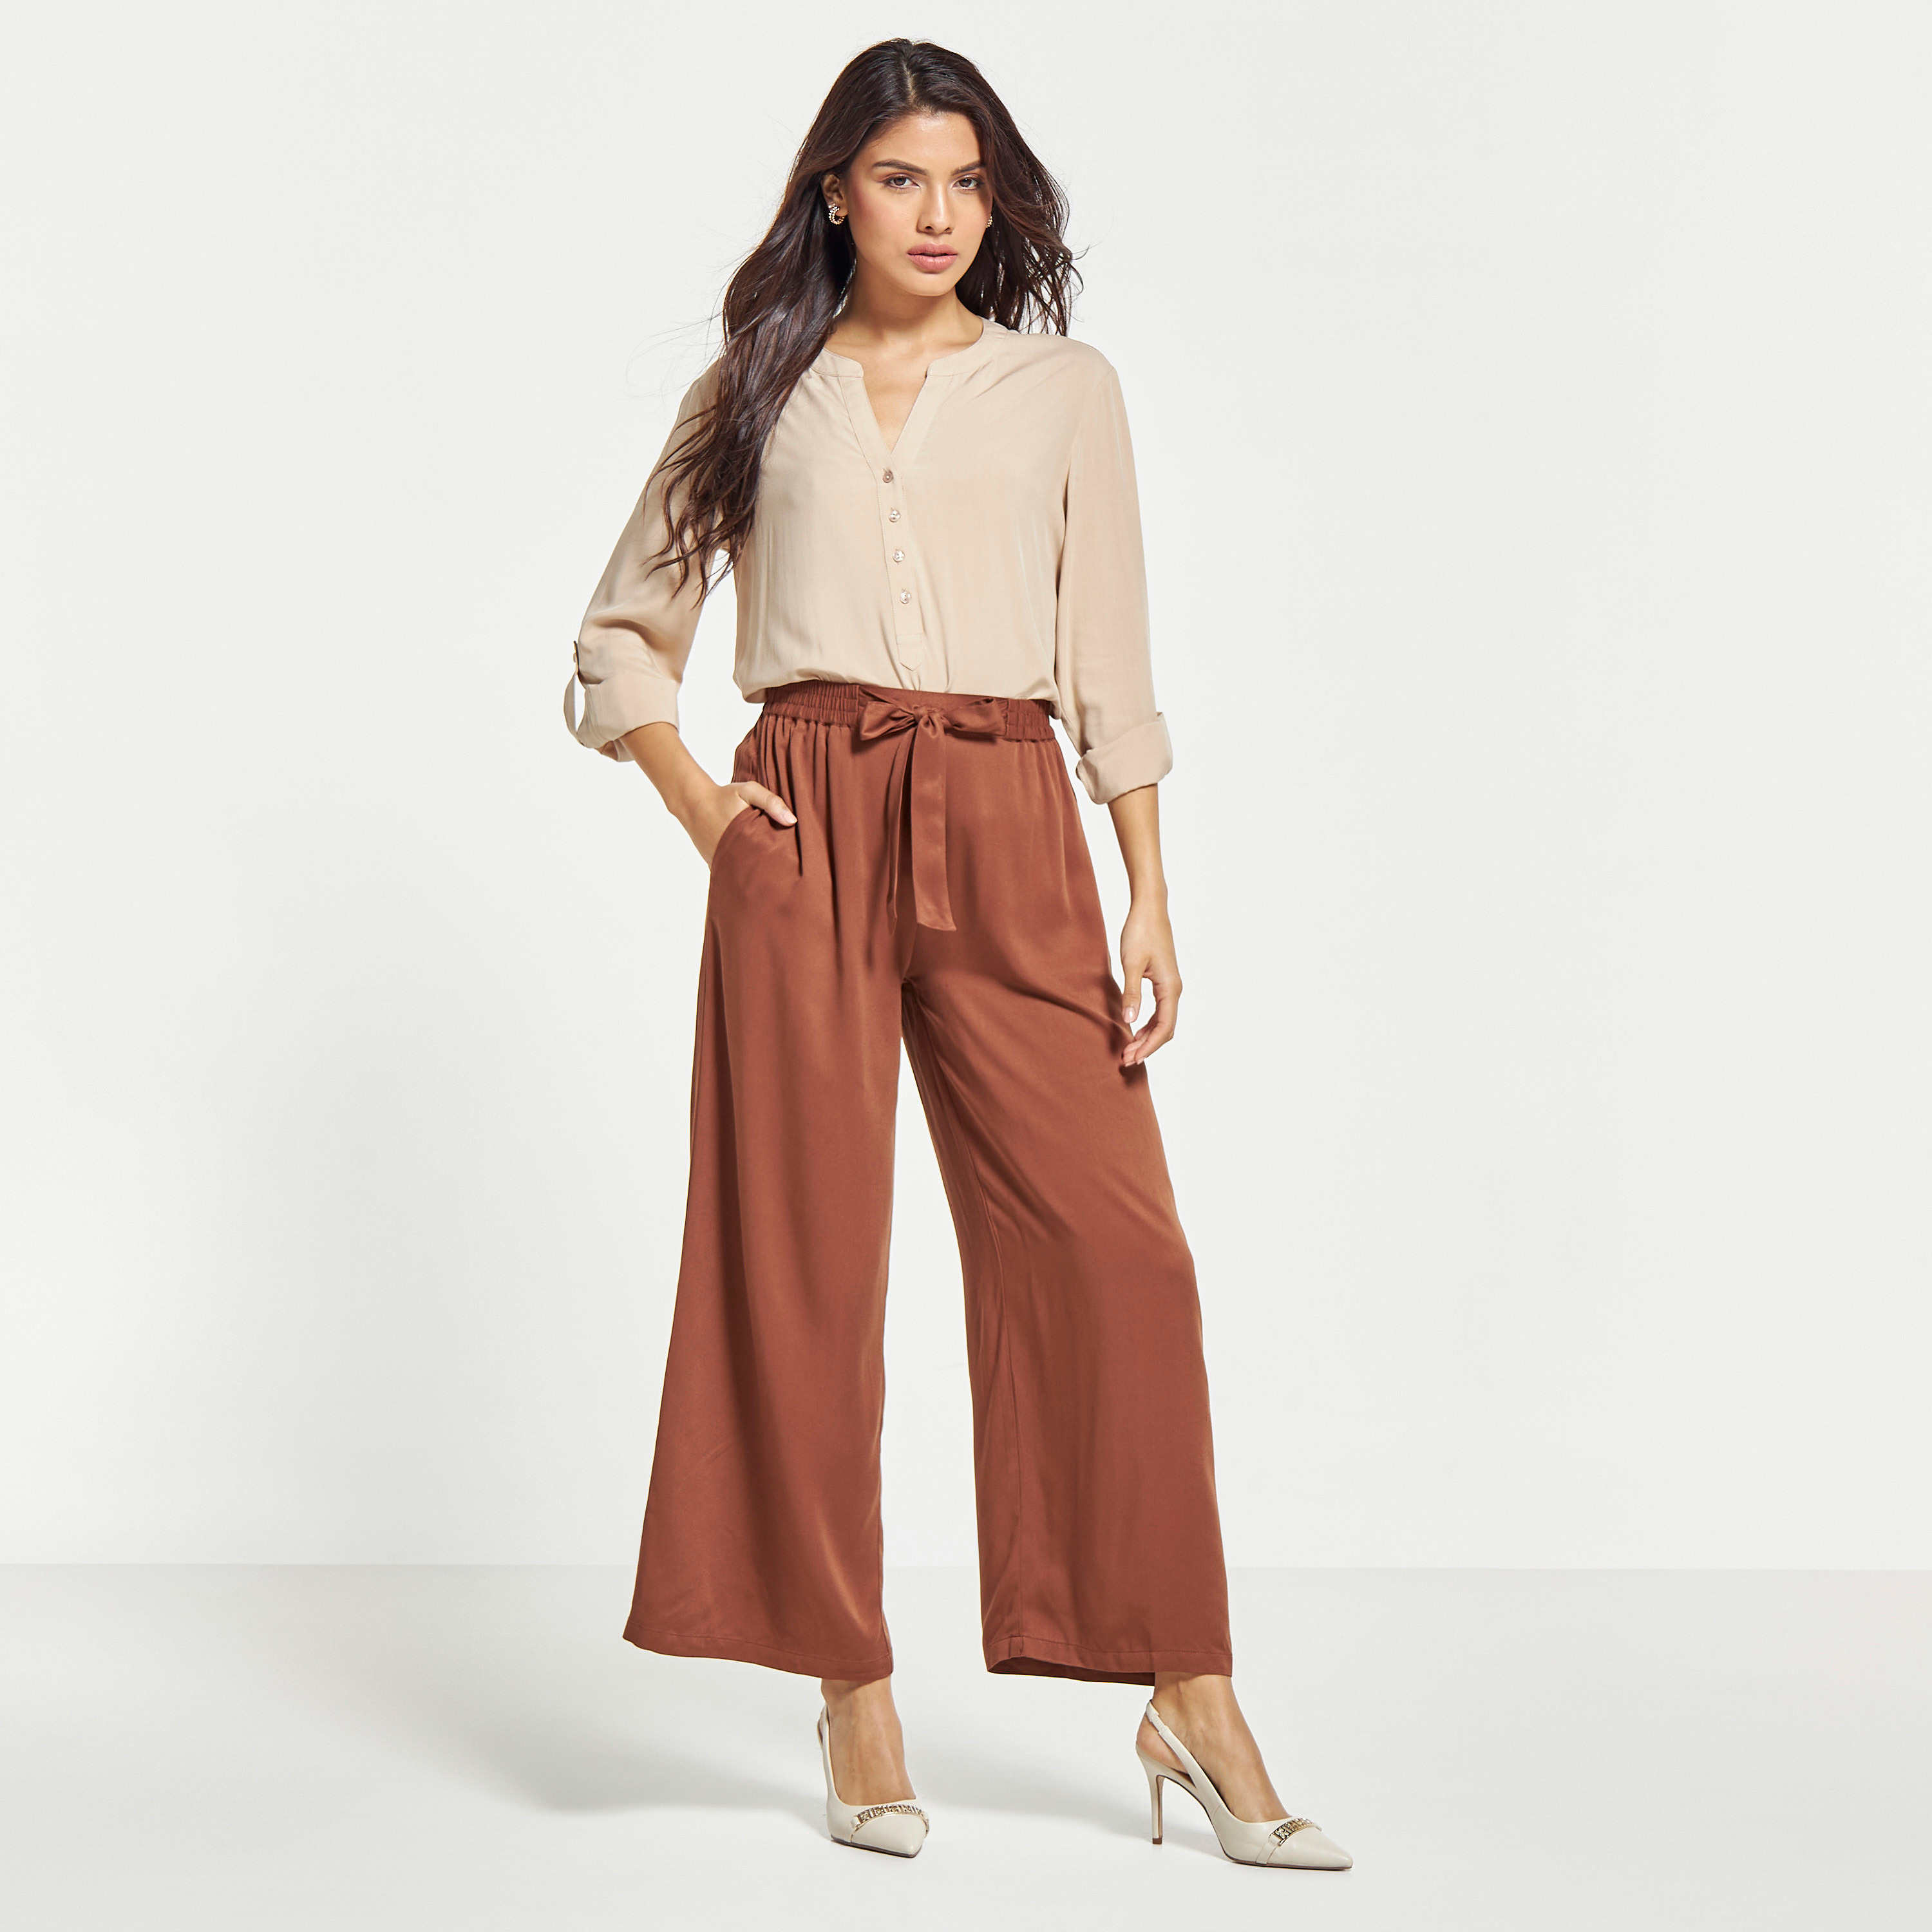 White Off Shoulder Tie Up Palazzo Pant Two Piece Set - Hot Miami Styles